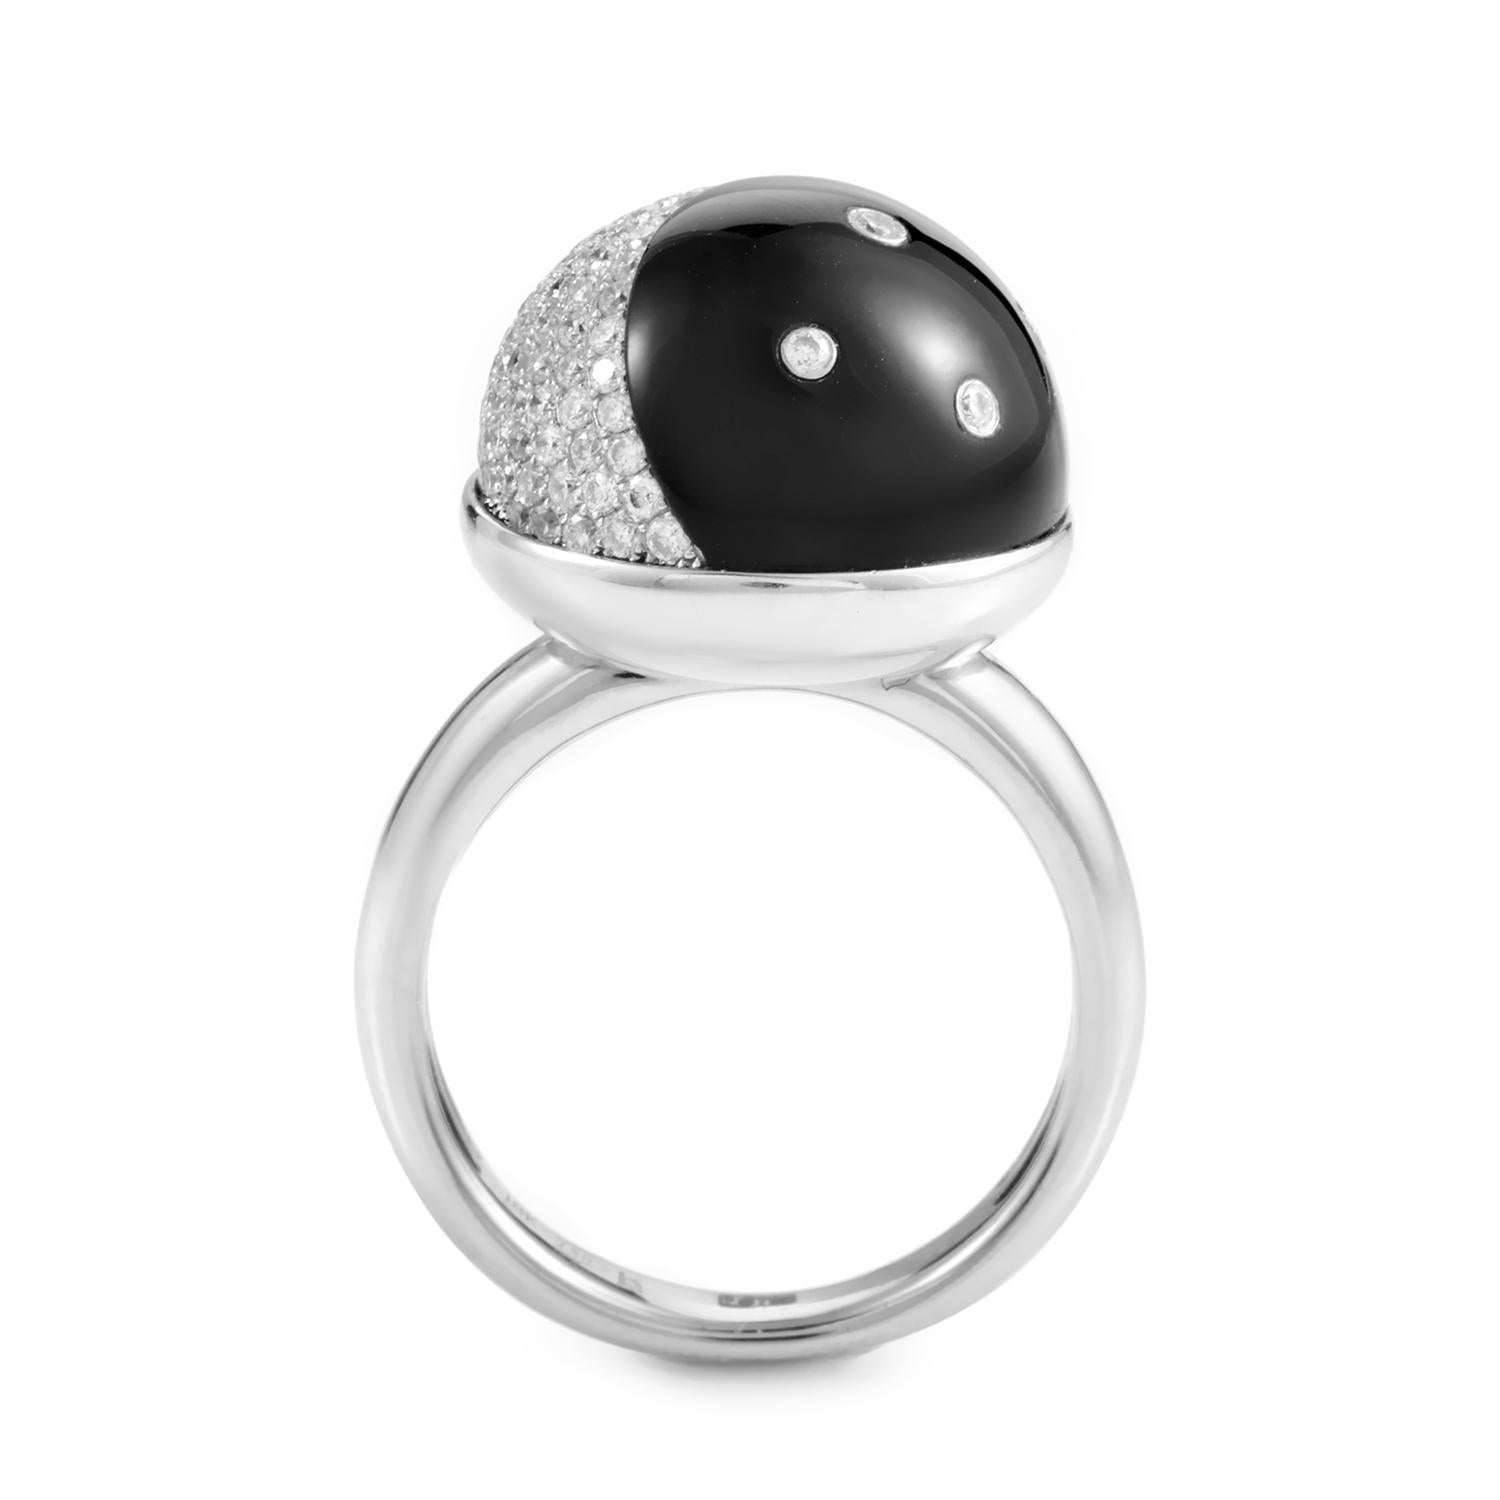 On top of an impeccably gleaming body, an astonishing decoration boasts a stark contrast produced by the stunning black onyx and bright glowing diamonds amounting to 1.02 carats, creating an intriguing sight for this 18K white gold ring.
